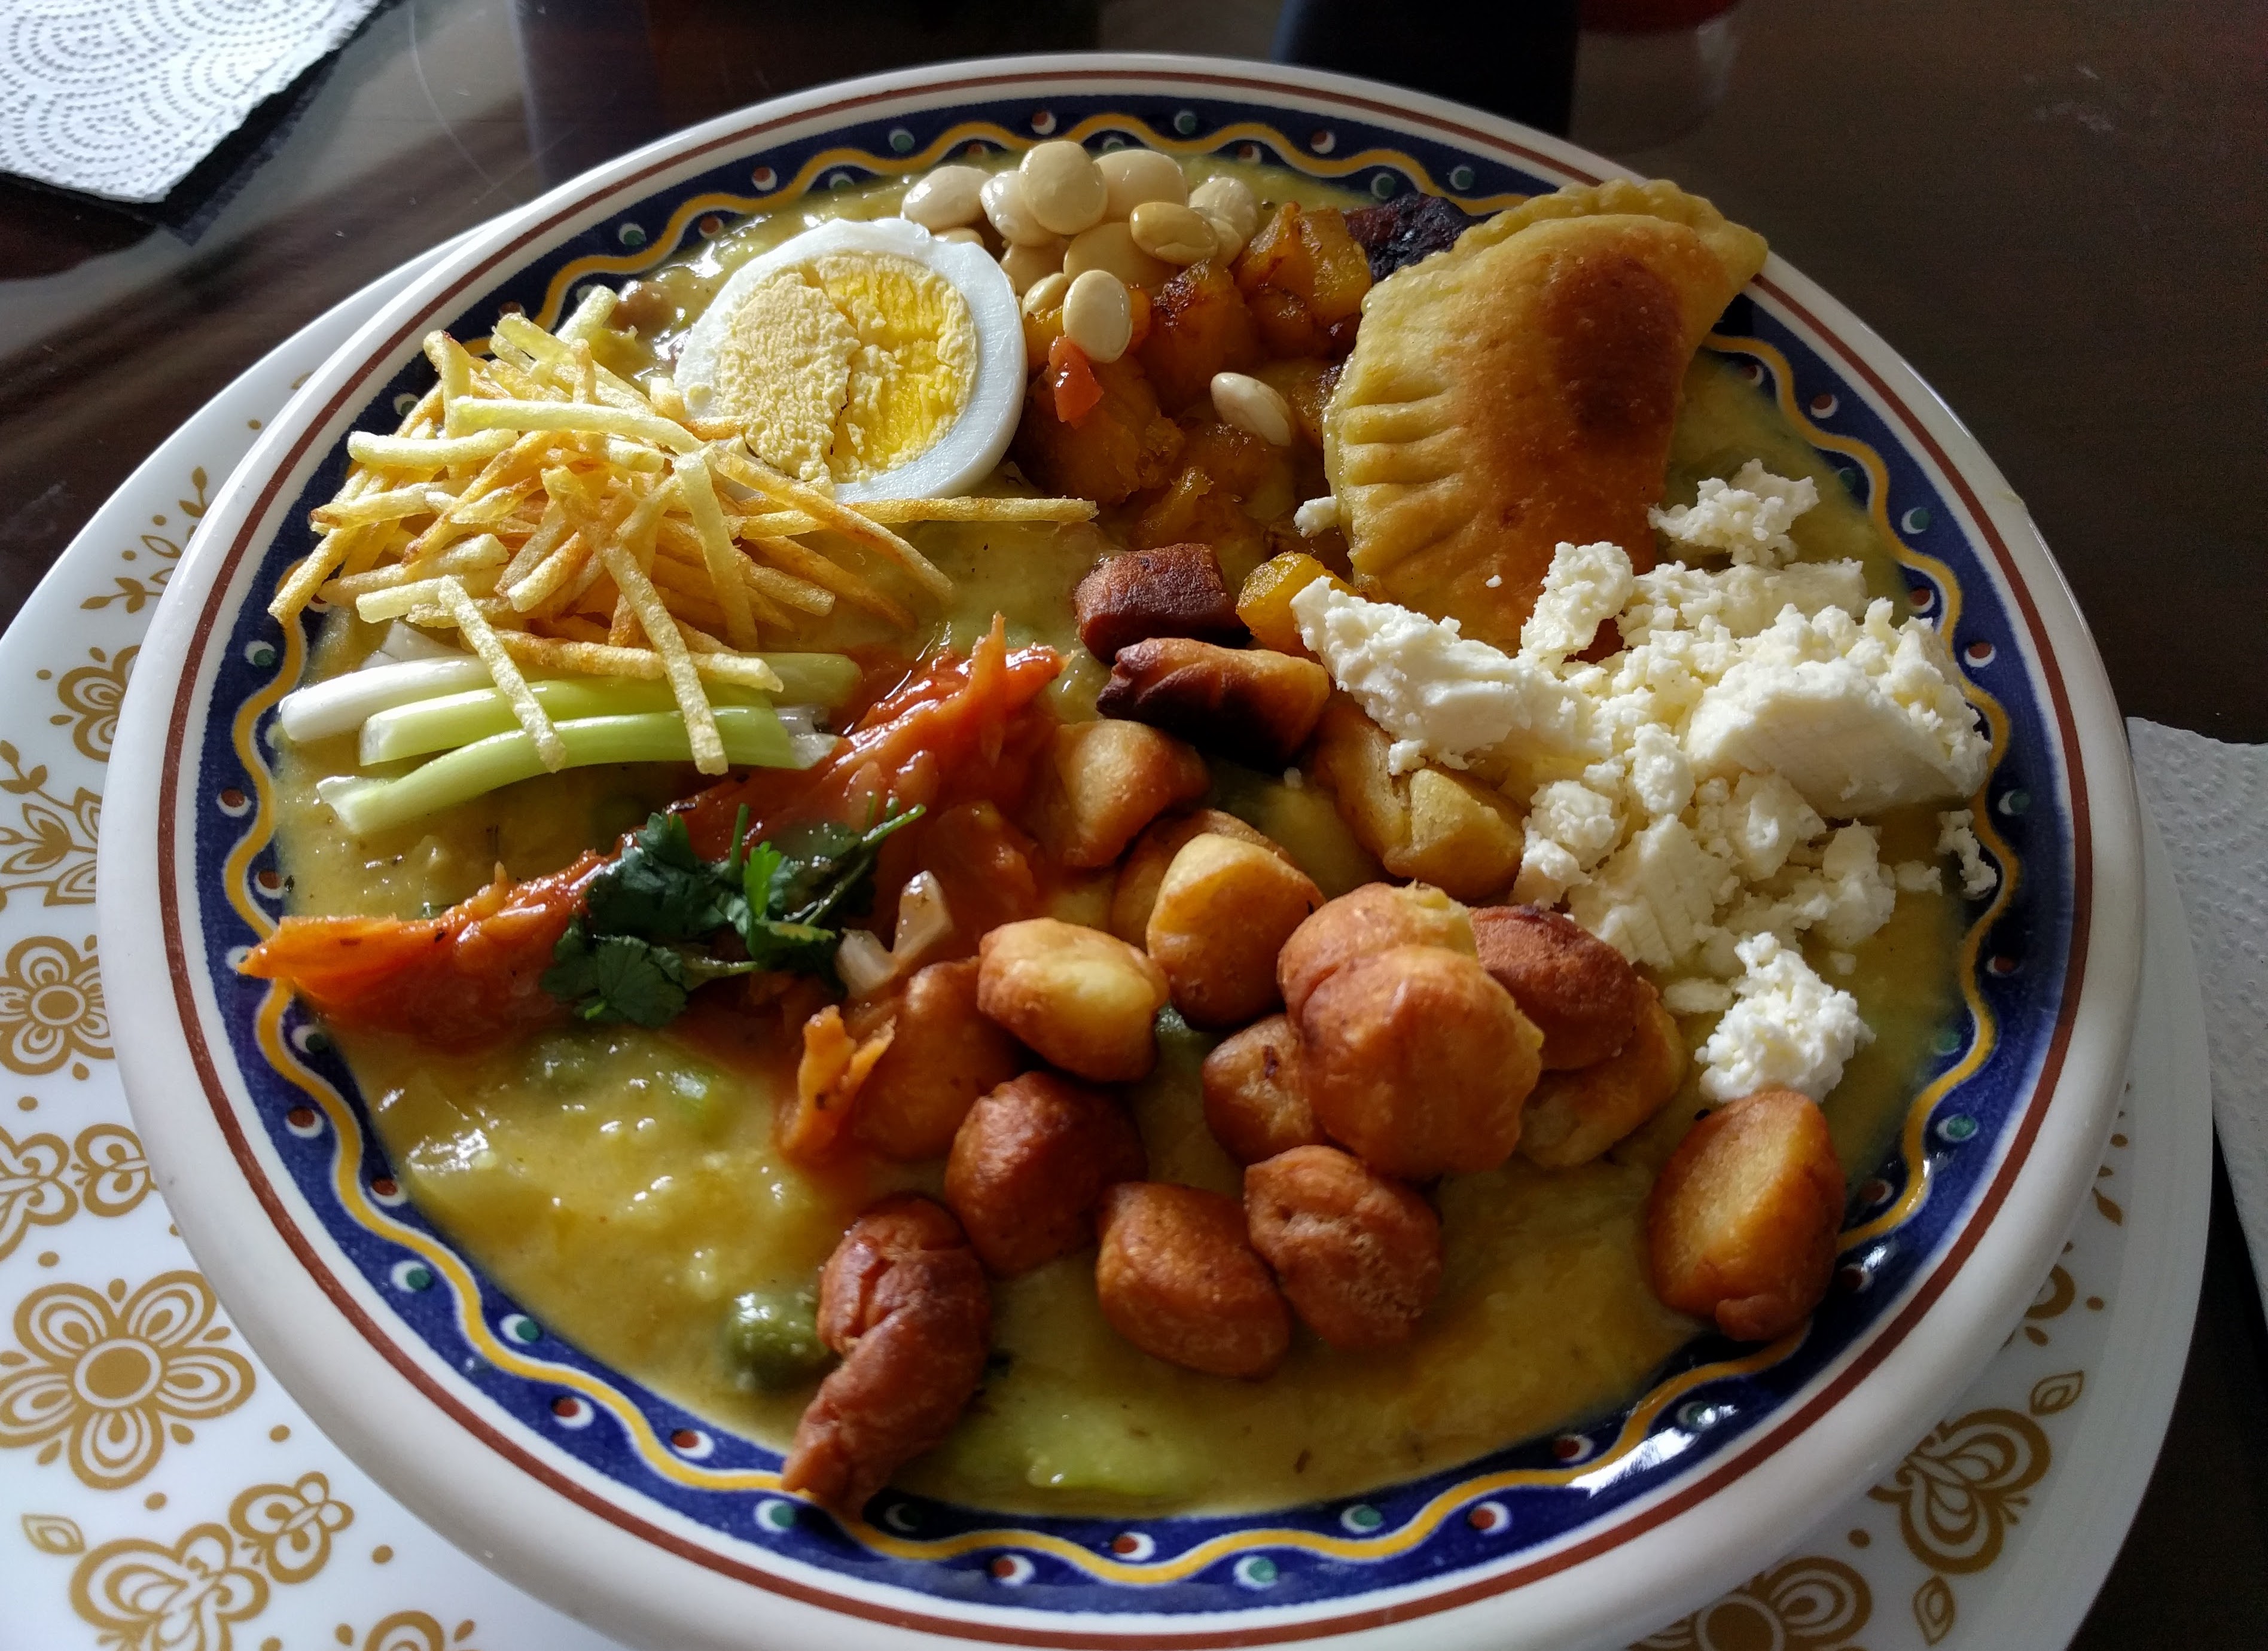 The fanesca recipe has been adapted in every family and region of Ecuador.  In addition to the 12 grains, other ingredients have been included.